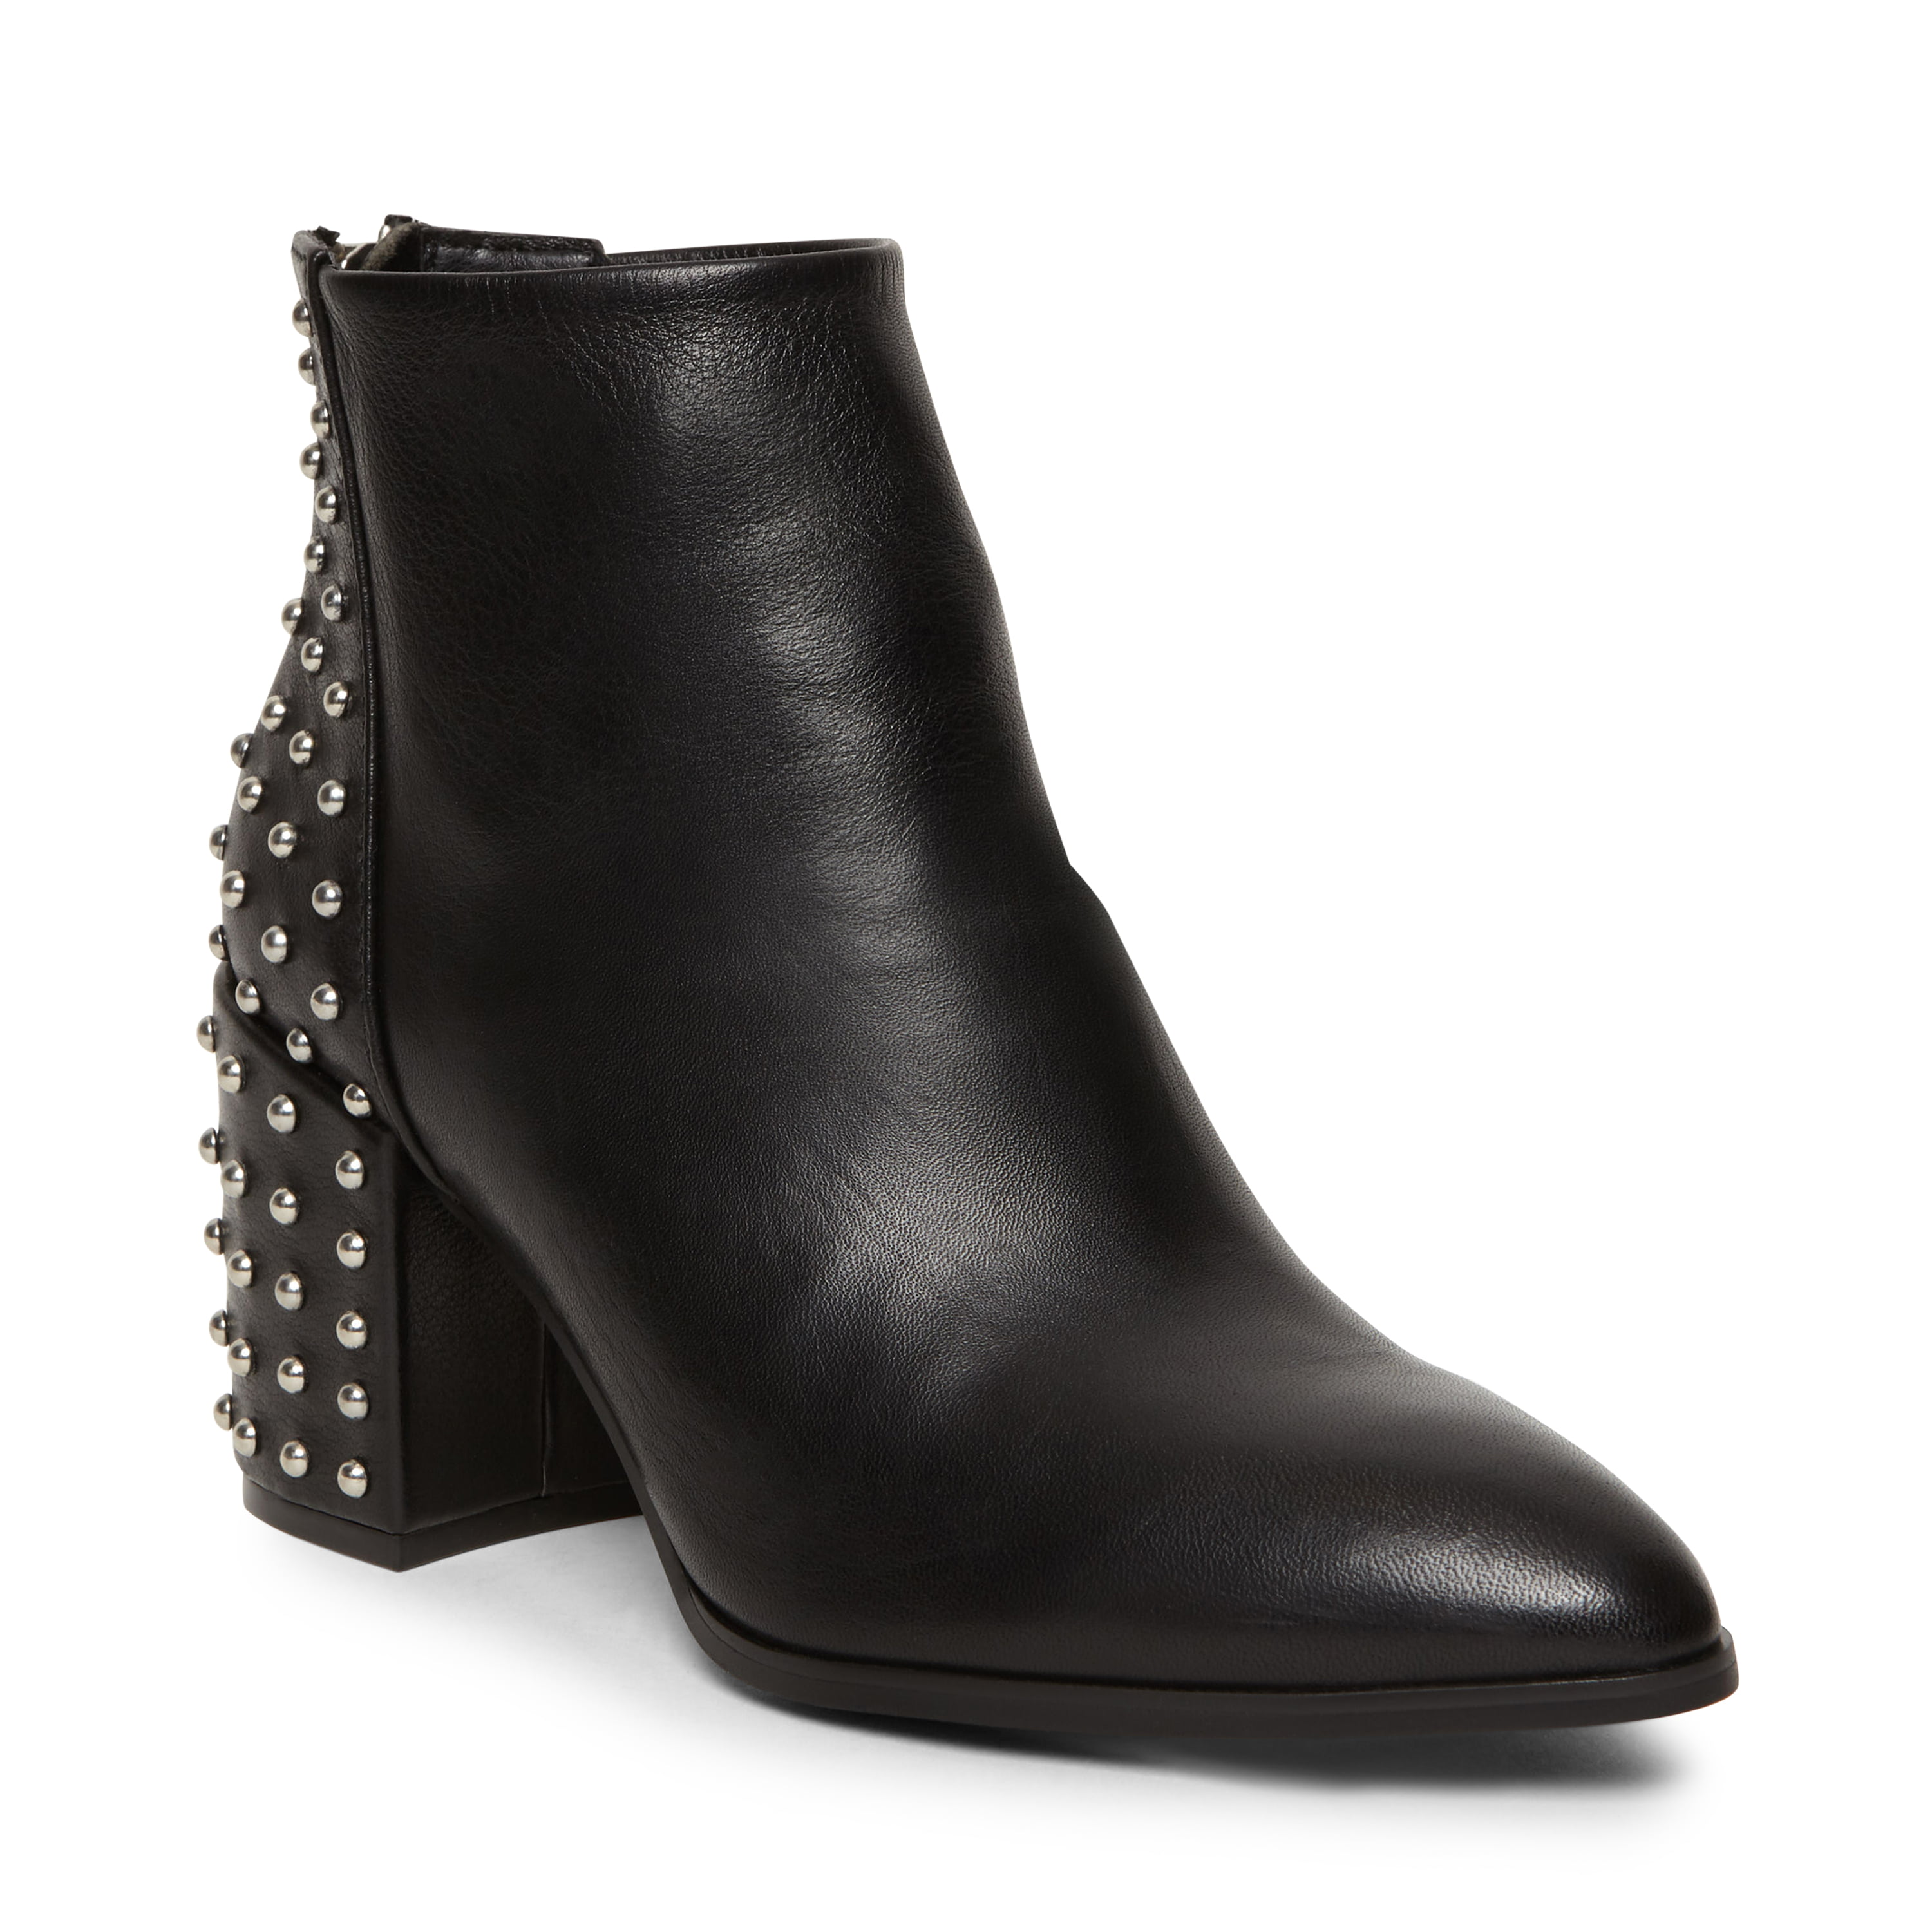 steve madden black booties with studs